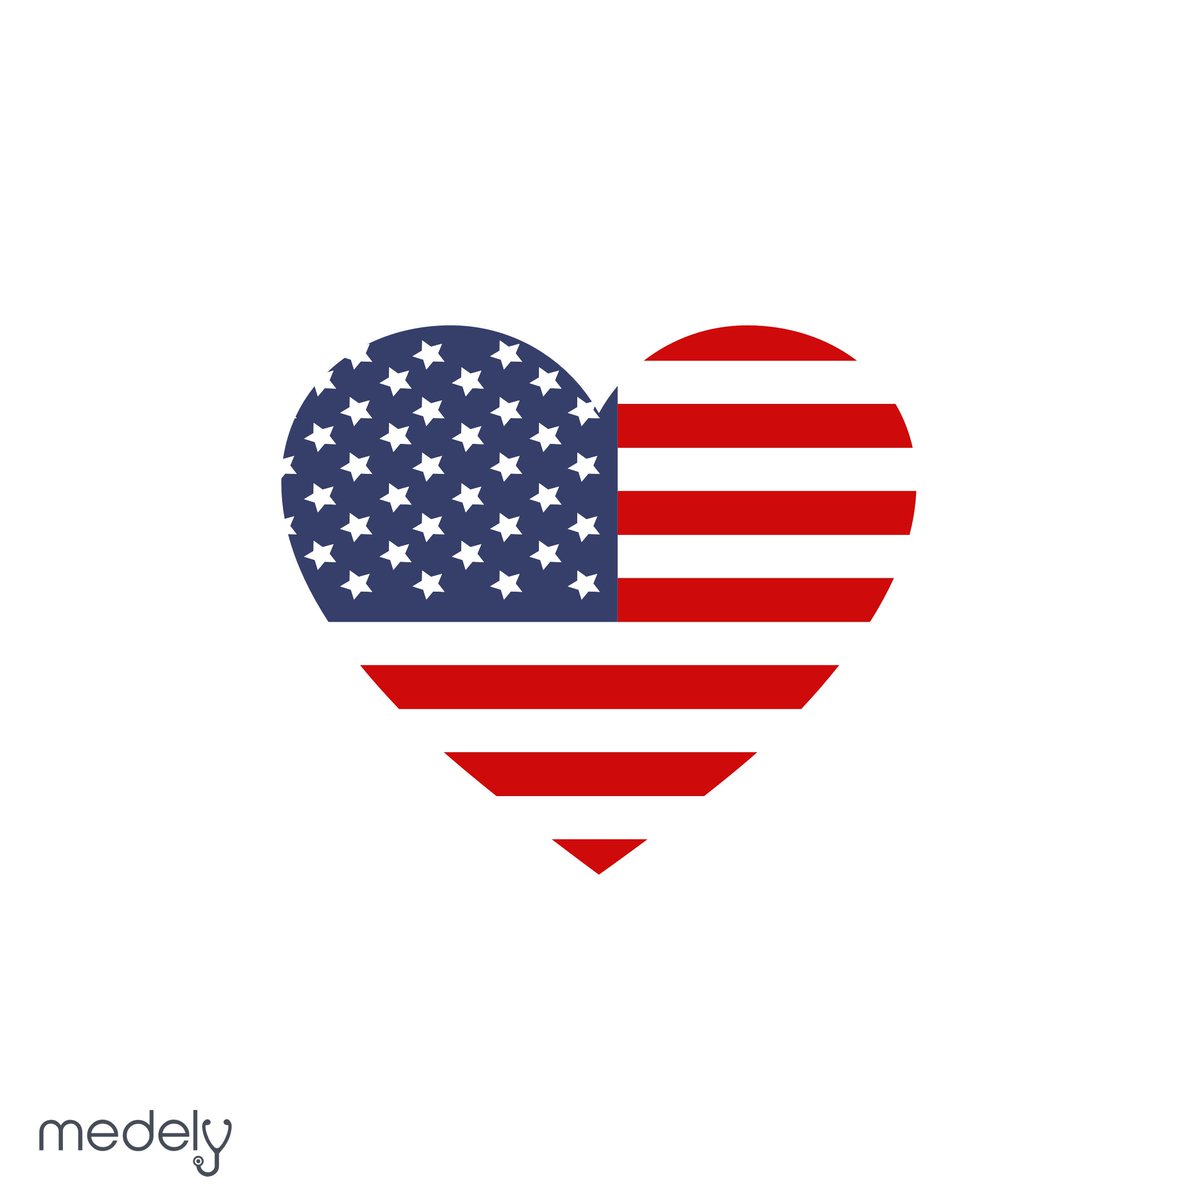 Medely On Twitter Pulse Check The Heartbeat Of America Is